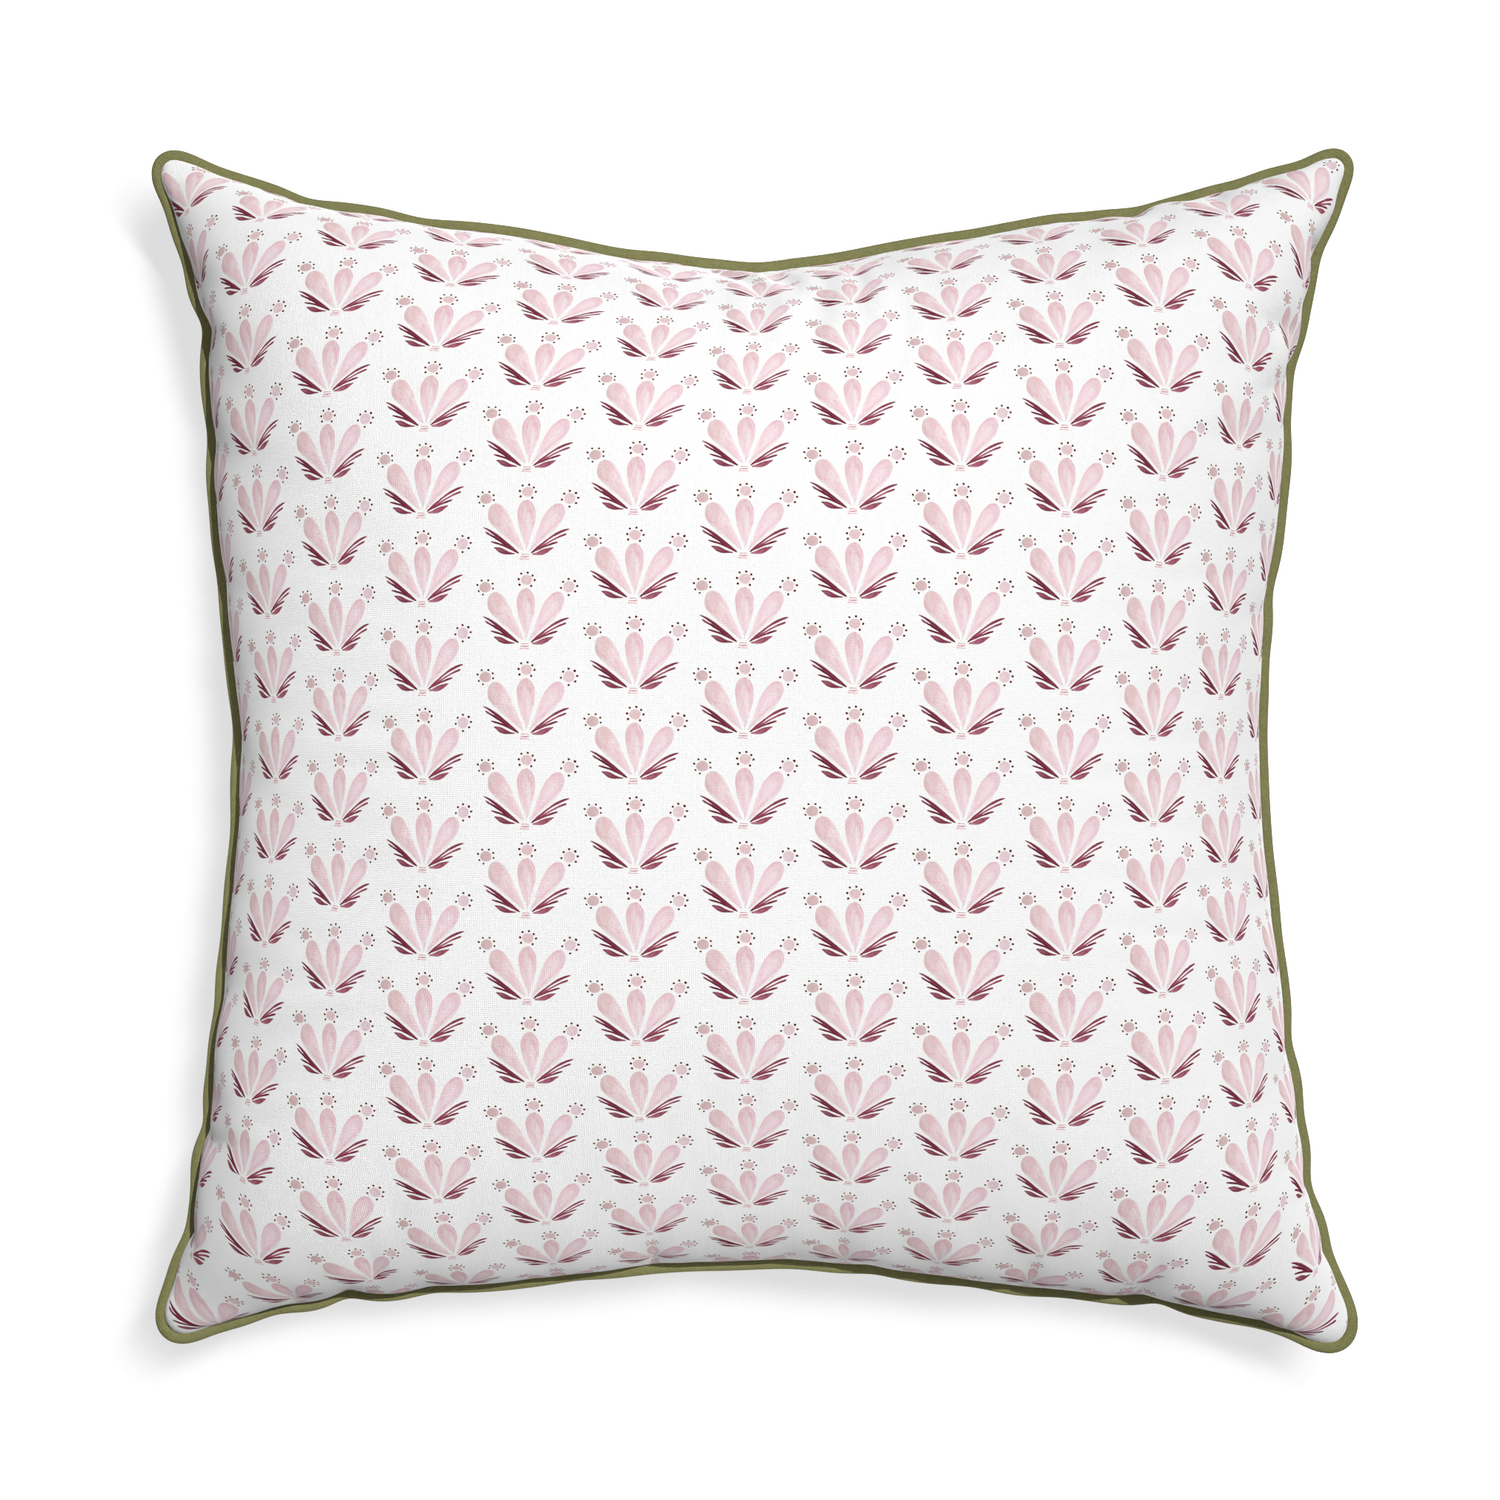 Euro-sham serena pink custom pink & burgundy drop repeat floralpillow with moss piping on white background